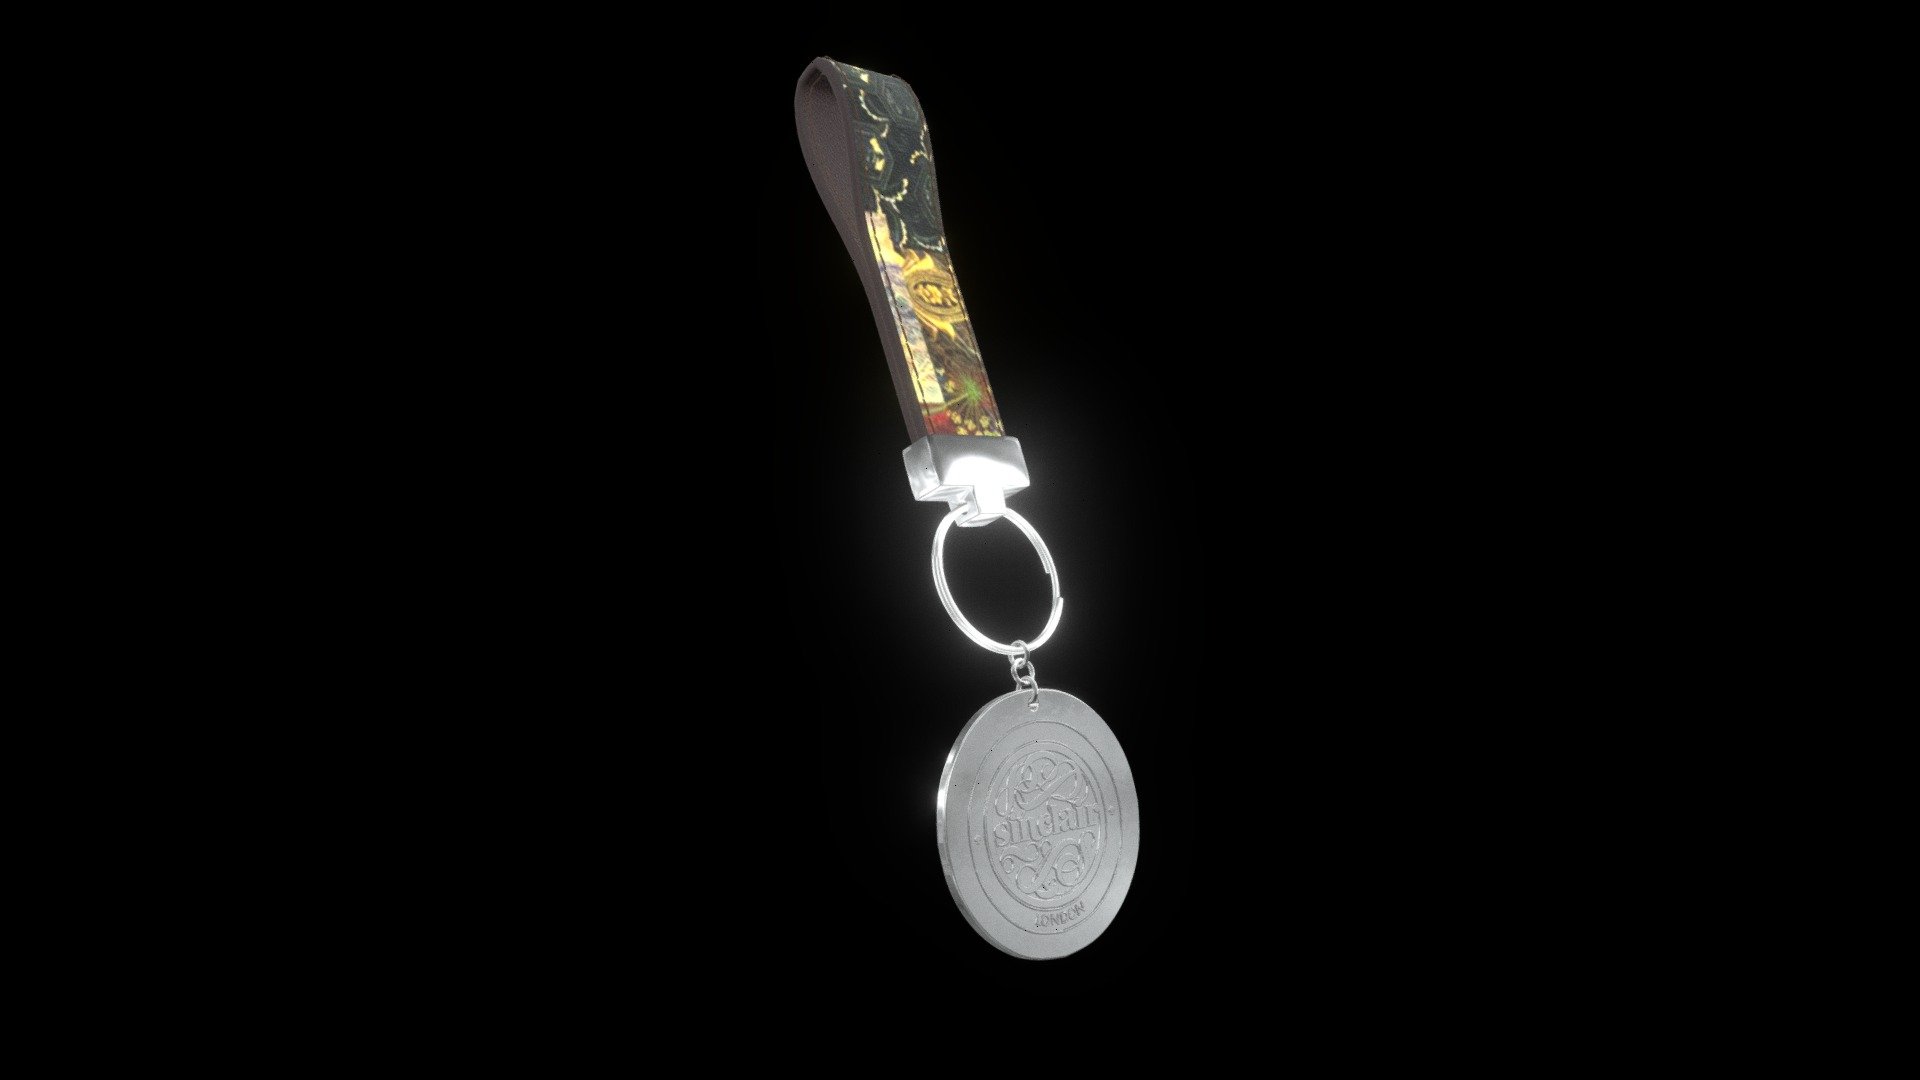 SINCLAIR - Christmas Collection Keyring
Silver - SINCLAIR - Christmas Collection Keyring Silver - 3D model by studioacciBR 3d model